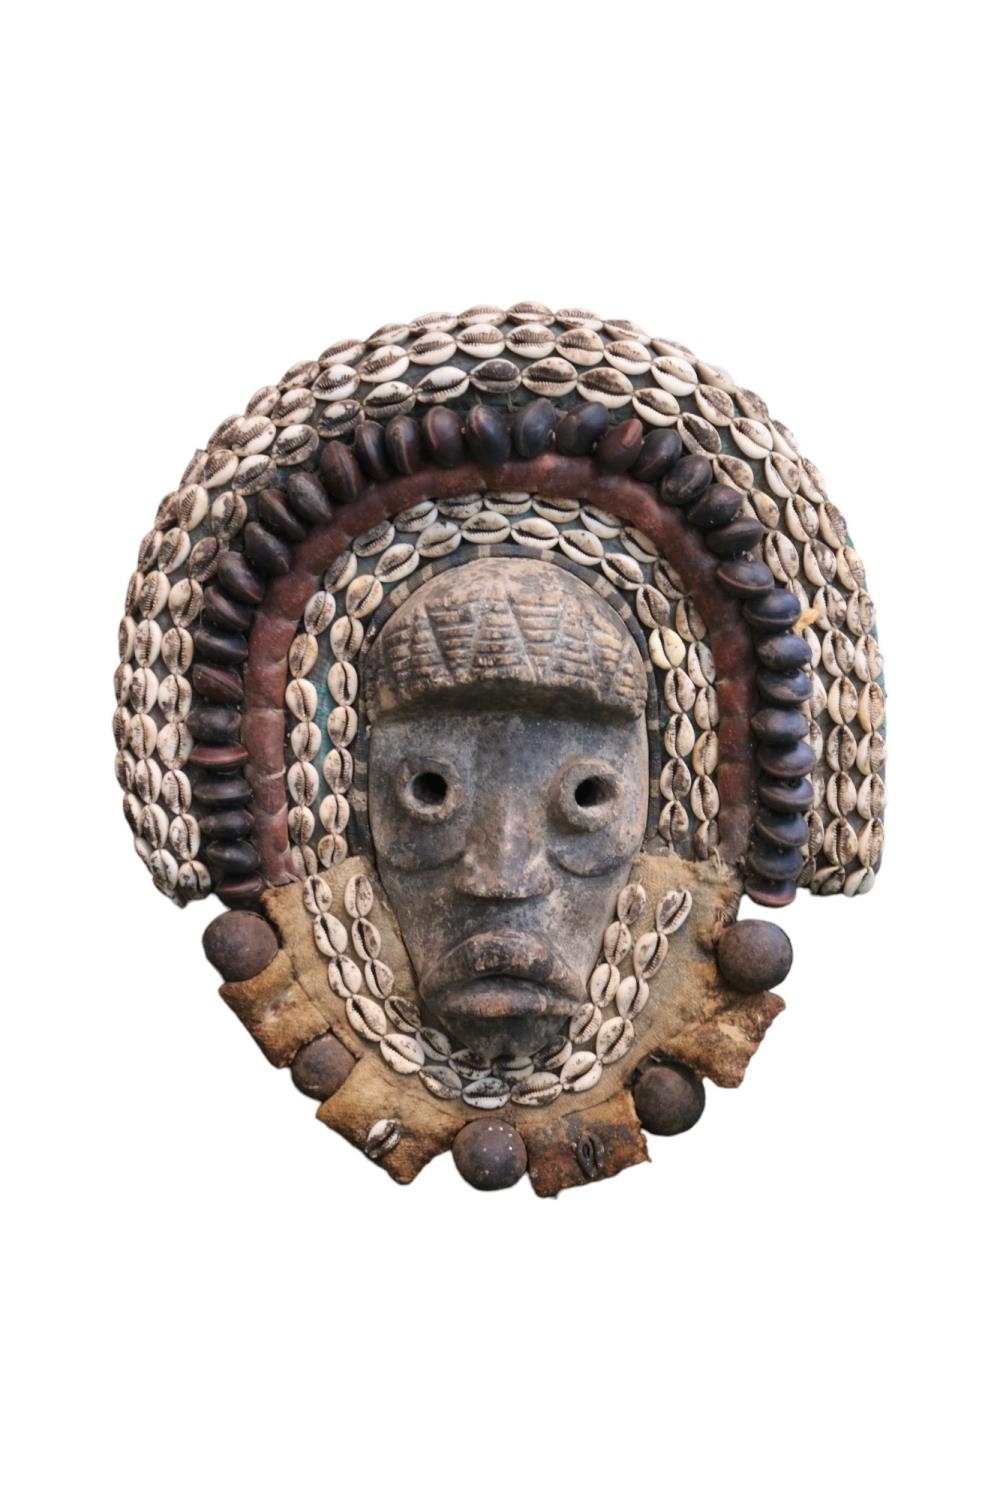 African Tribal Mask decorated with Cowrie shells and Nuts possibly Western Africa. 45cm in Height